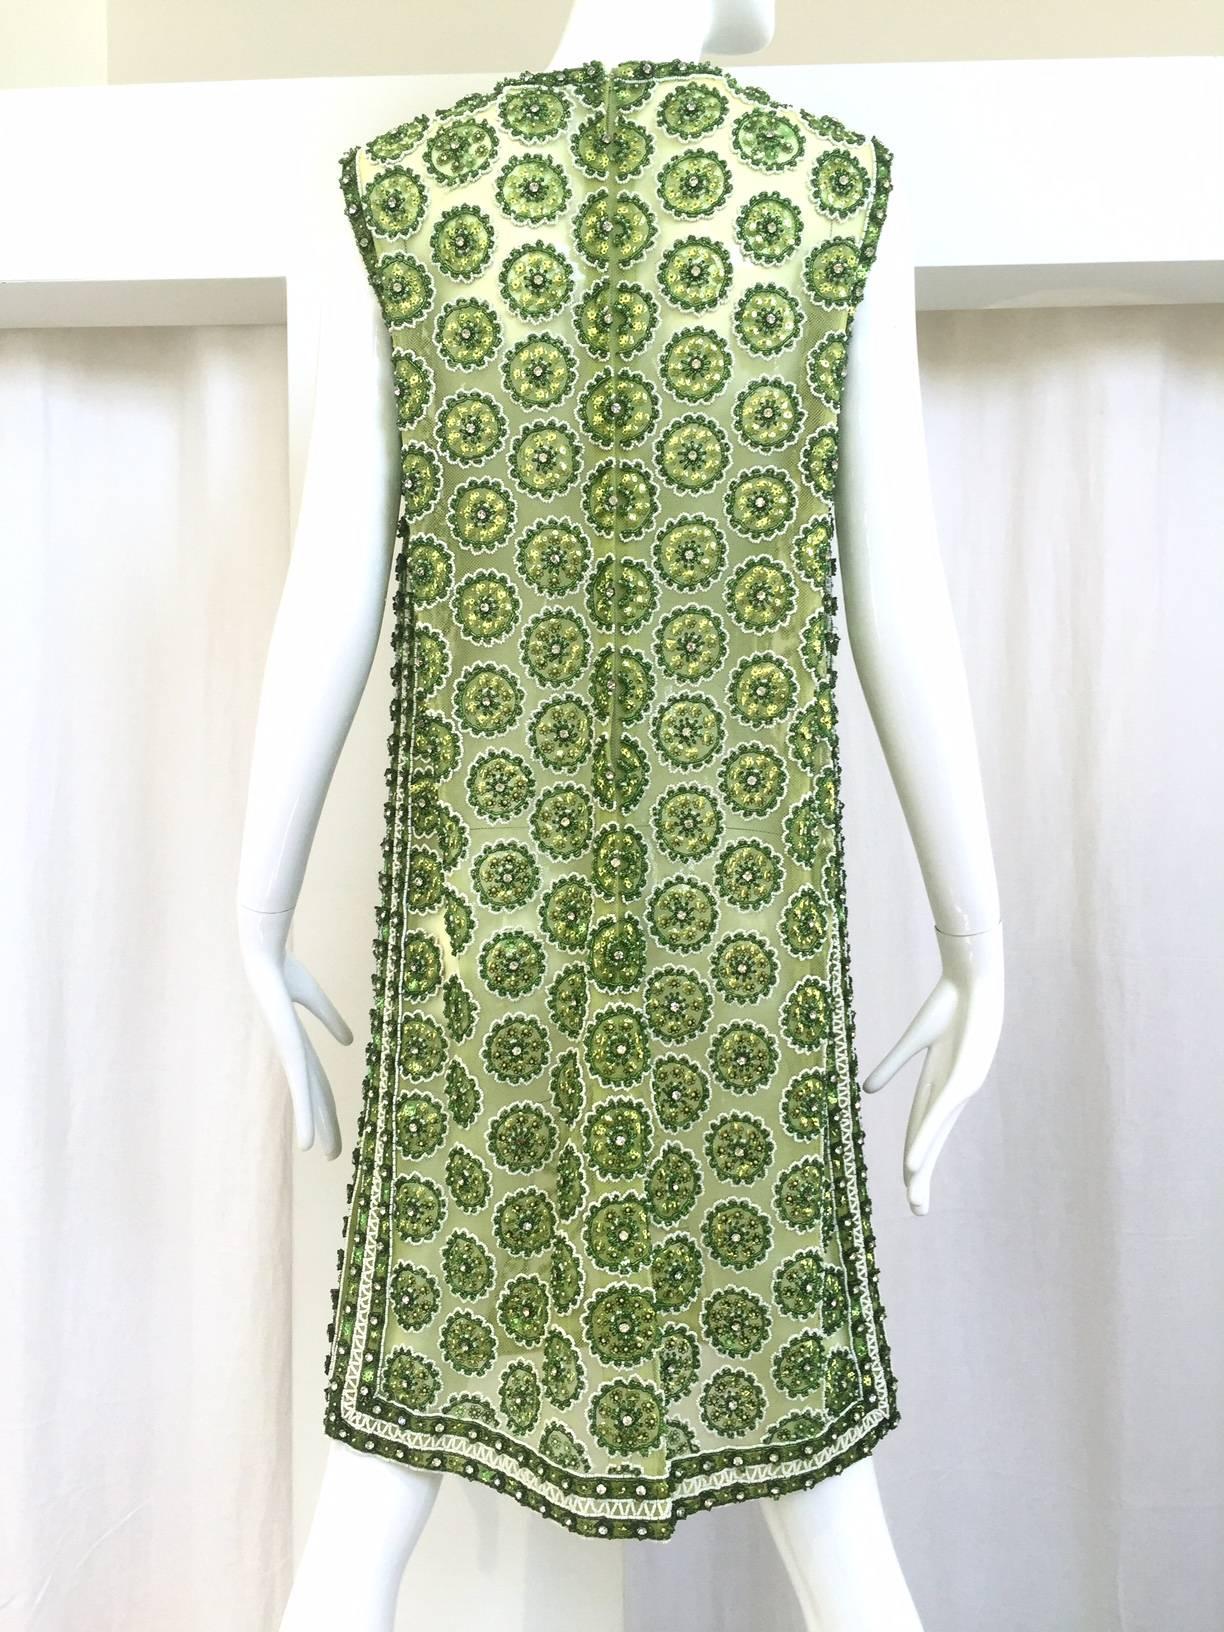 Beautiful 1960s lime green dress with beads and rhinestones. Size: 8
Bust: 36